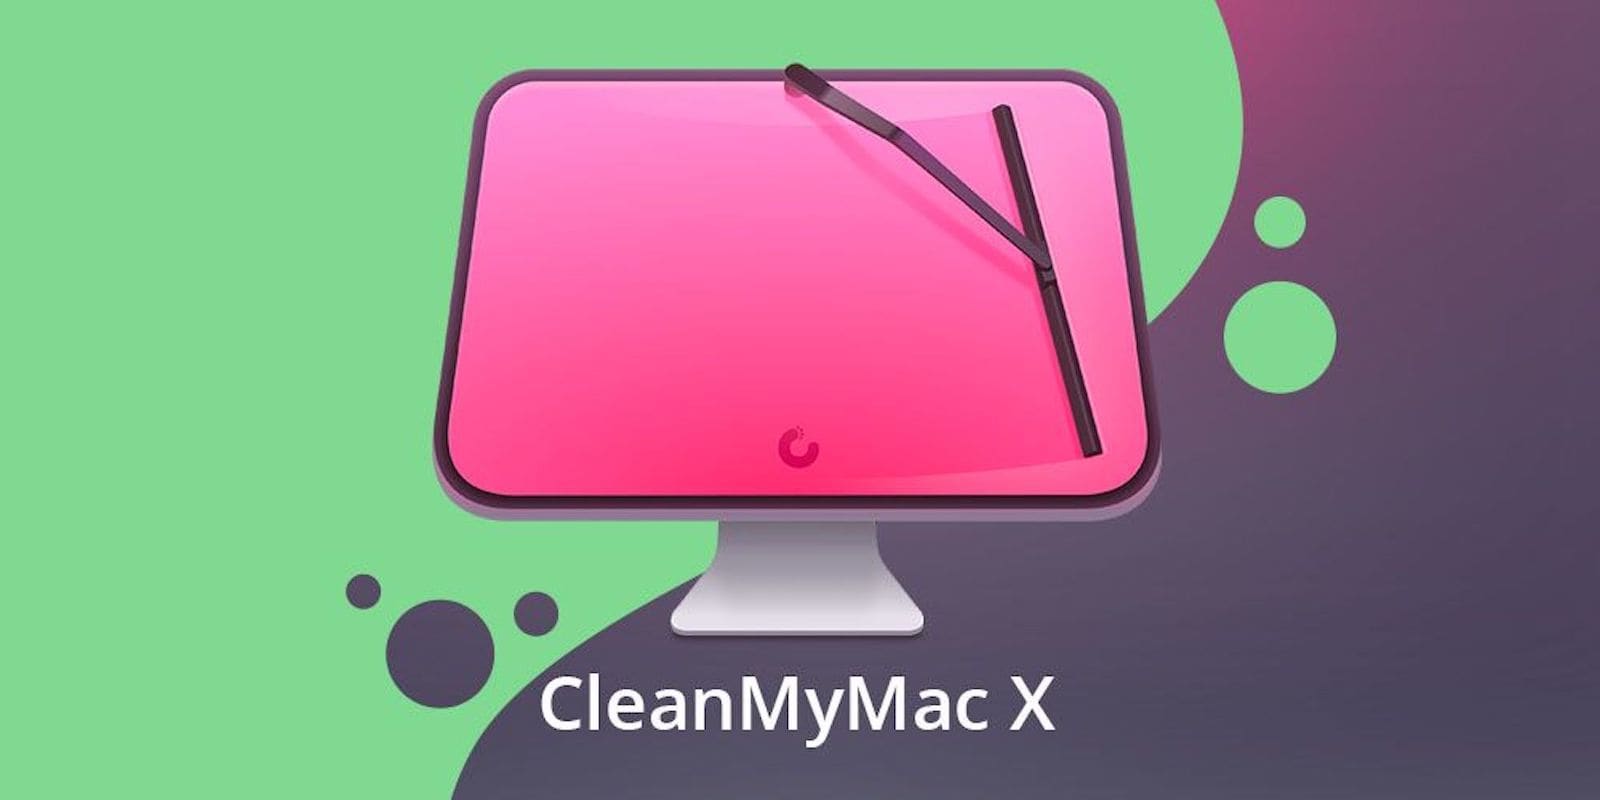 CLEANMYMAC X: MAKE YOUR MAC AS GOOD AS NEW